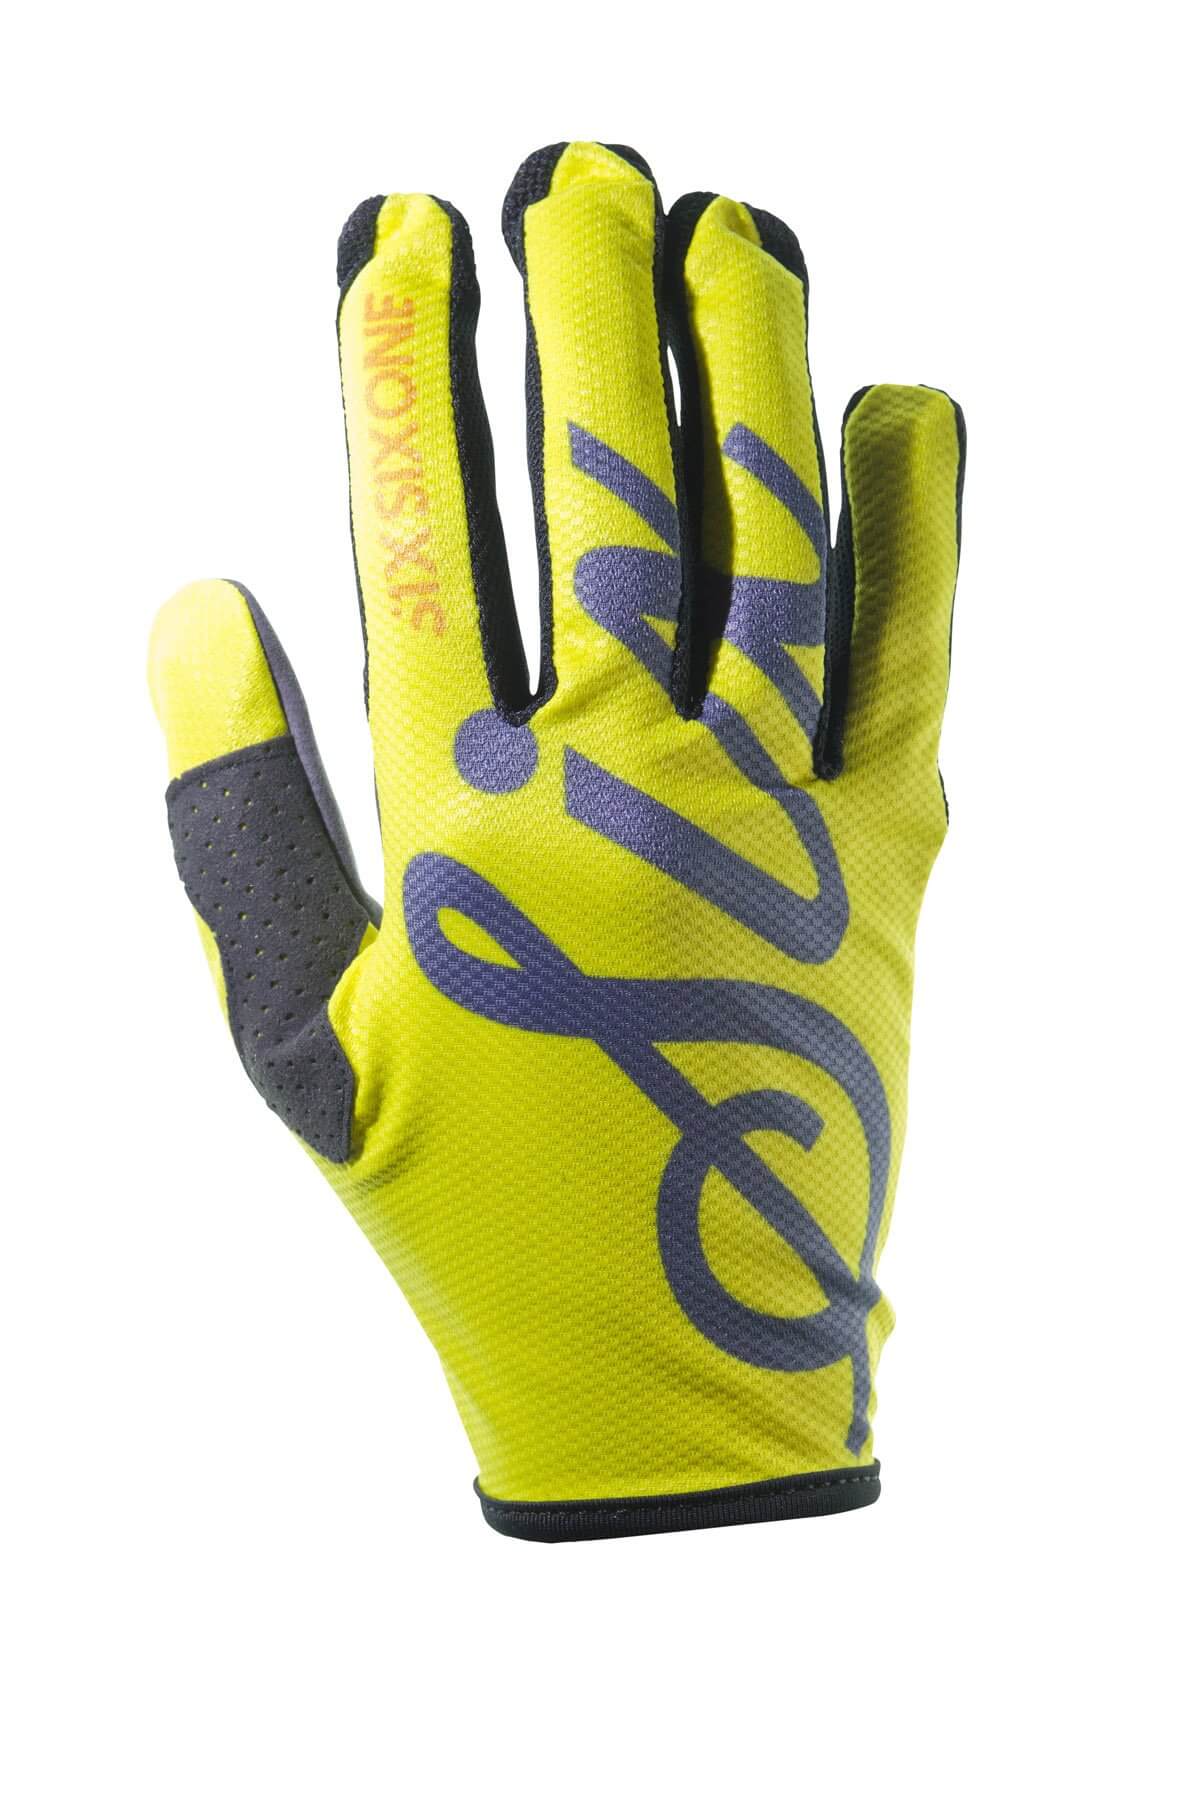 GUANTE SIX SIX ONE YOUTH COMP GLOVE YLLW SCRIPT